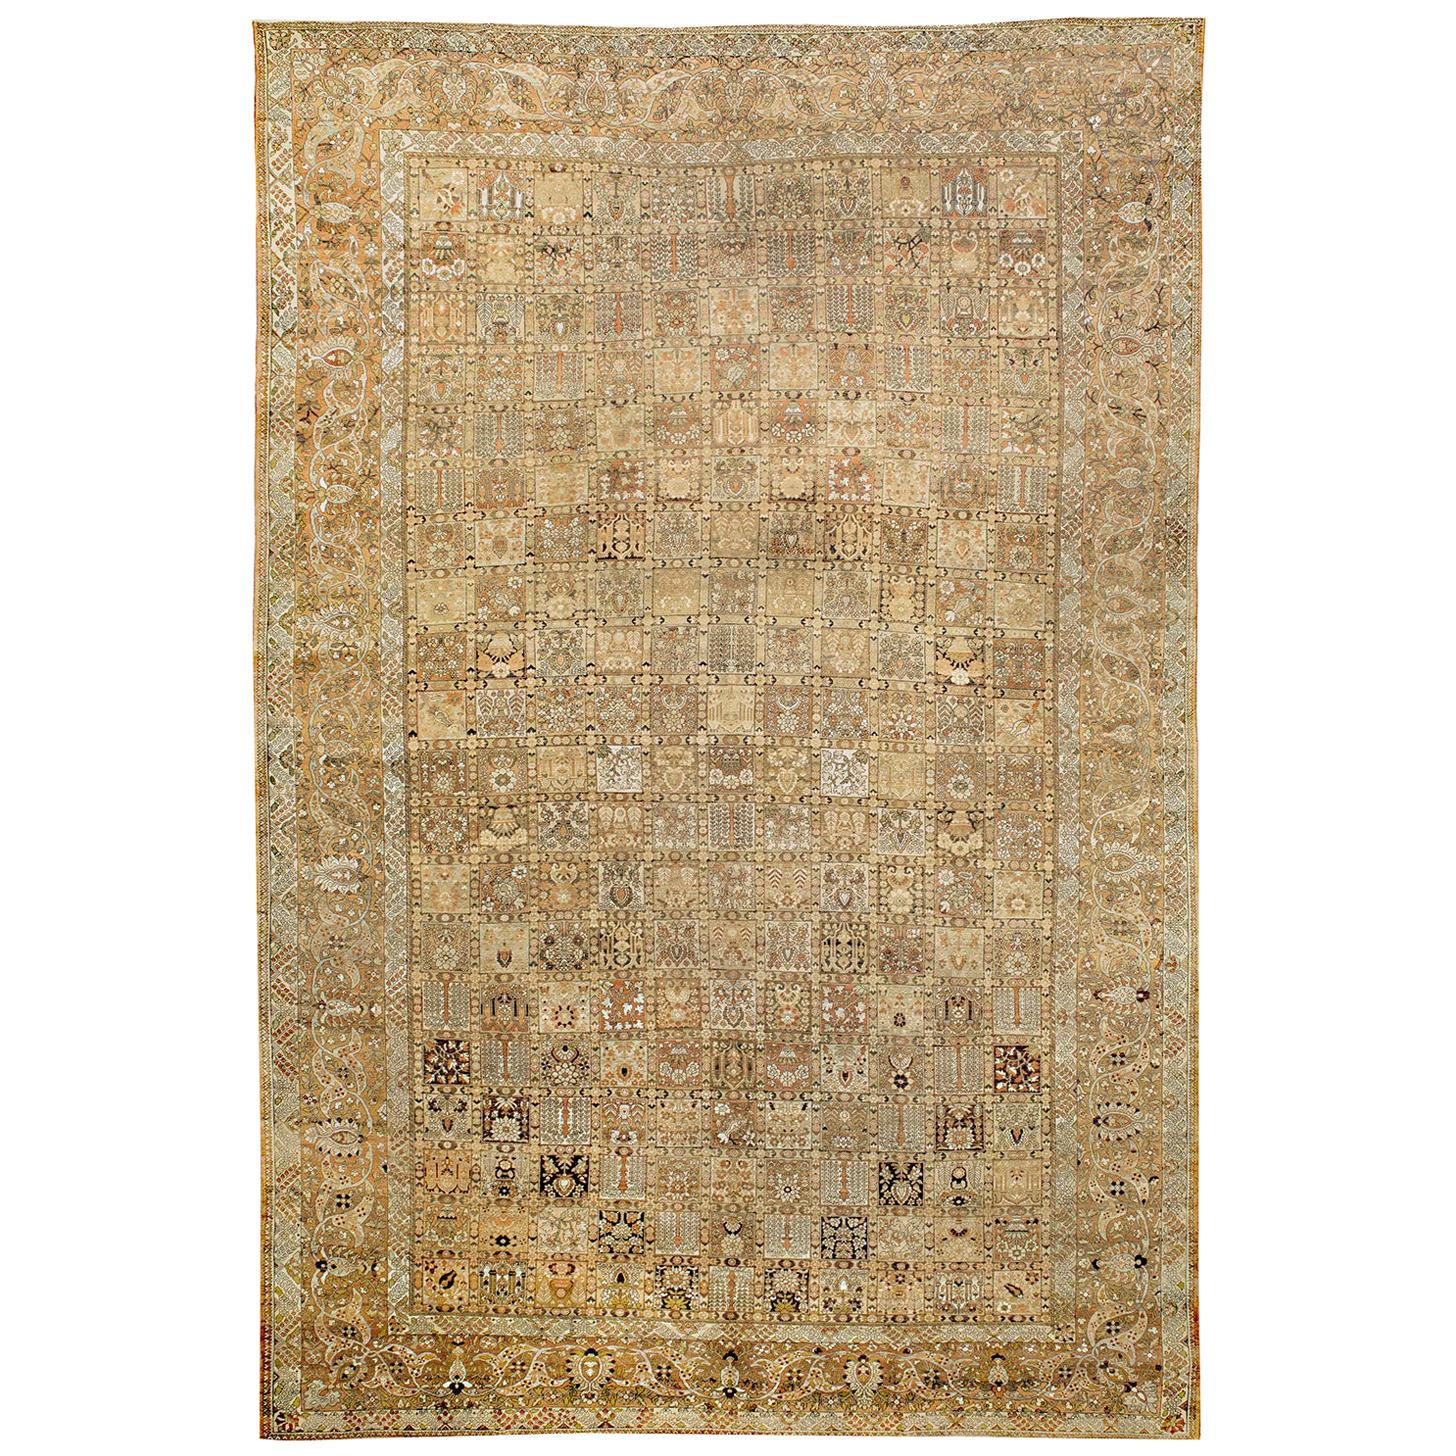 Oversize Antique Persian Bakhtiar Rug with Brown and White Botanical Details